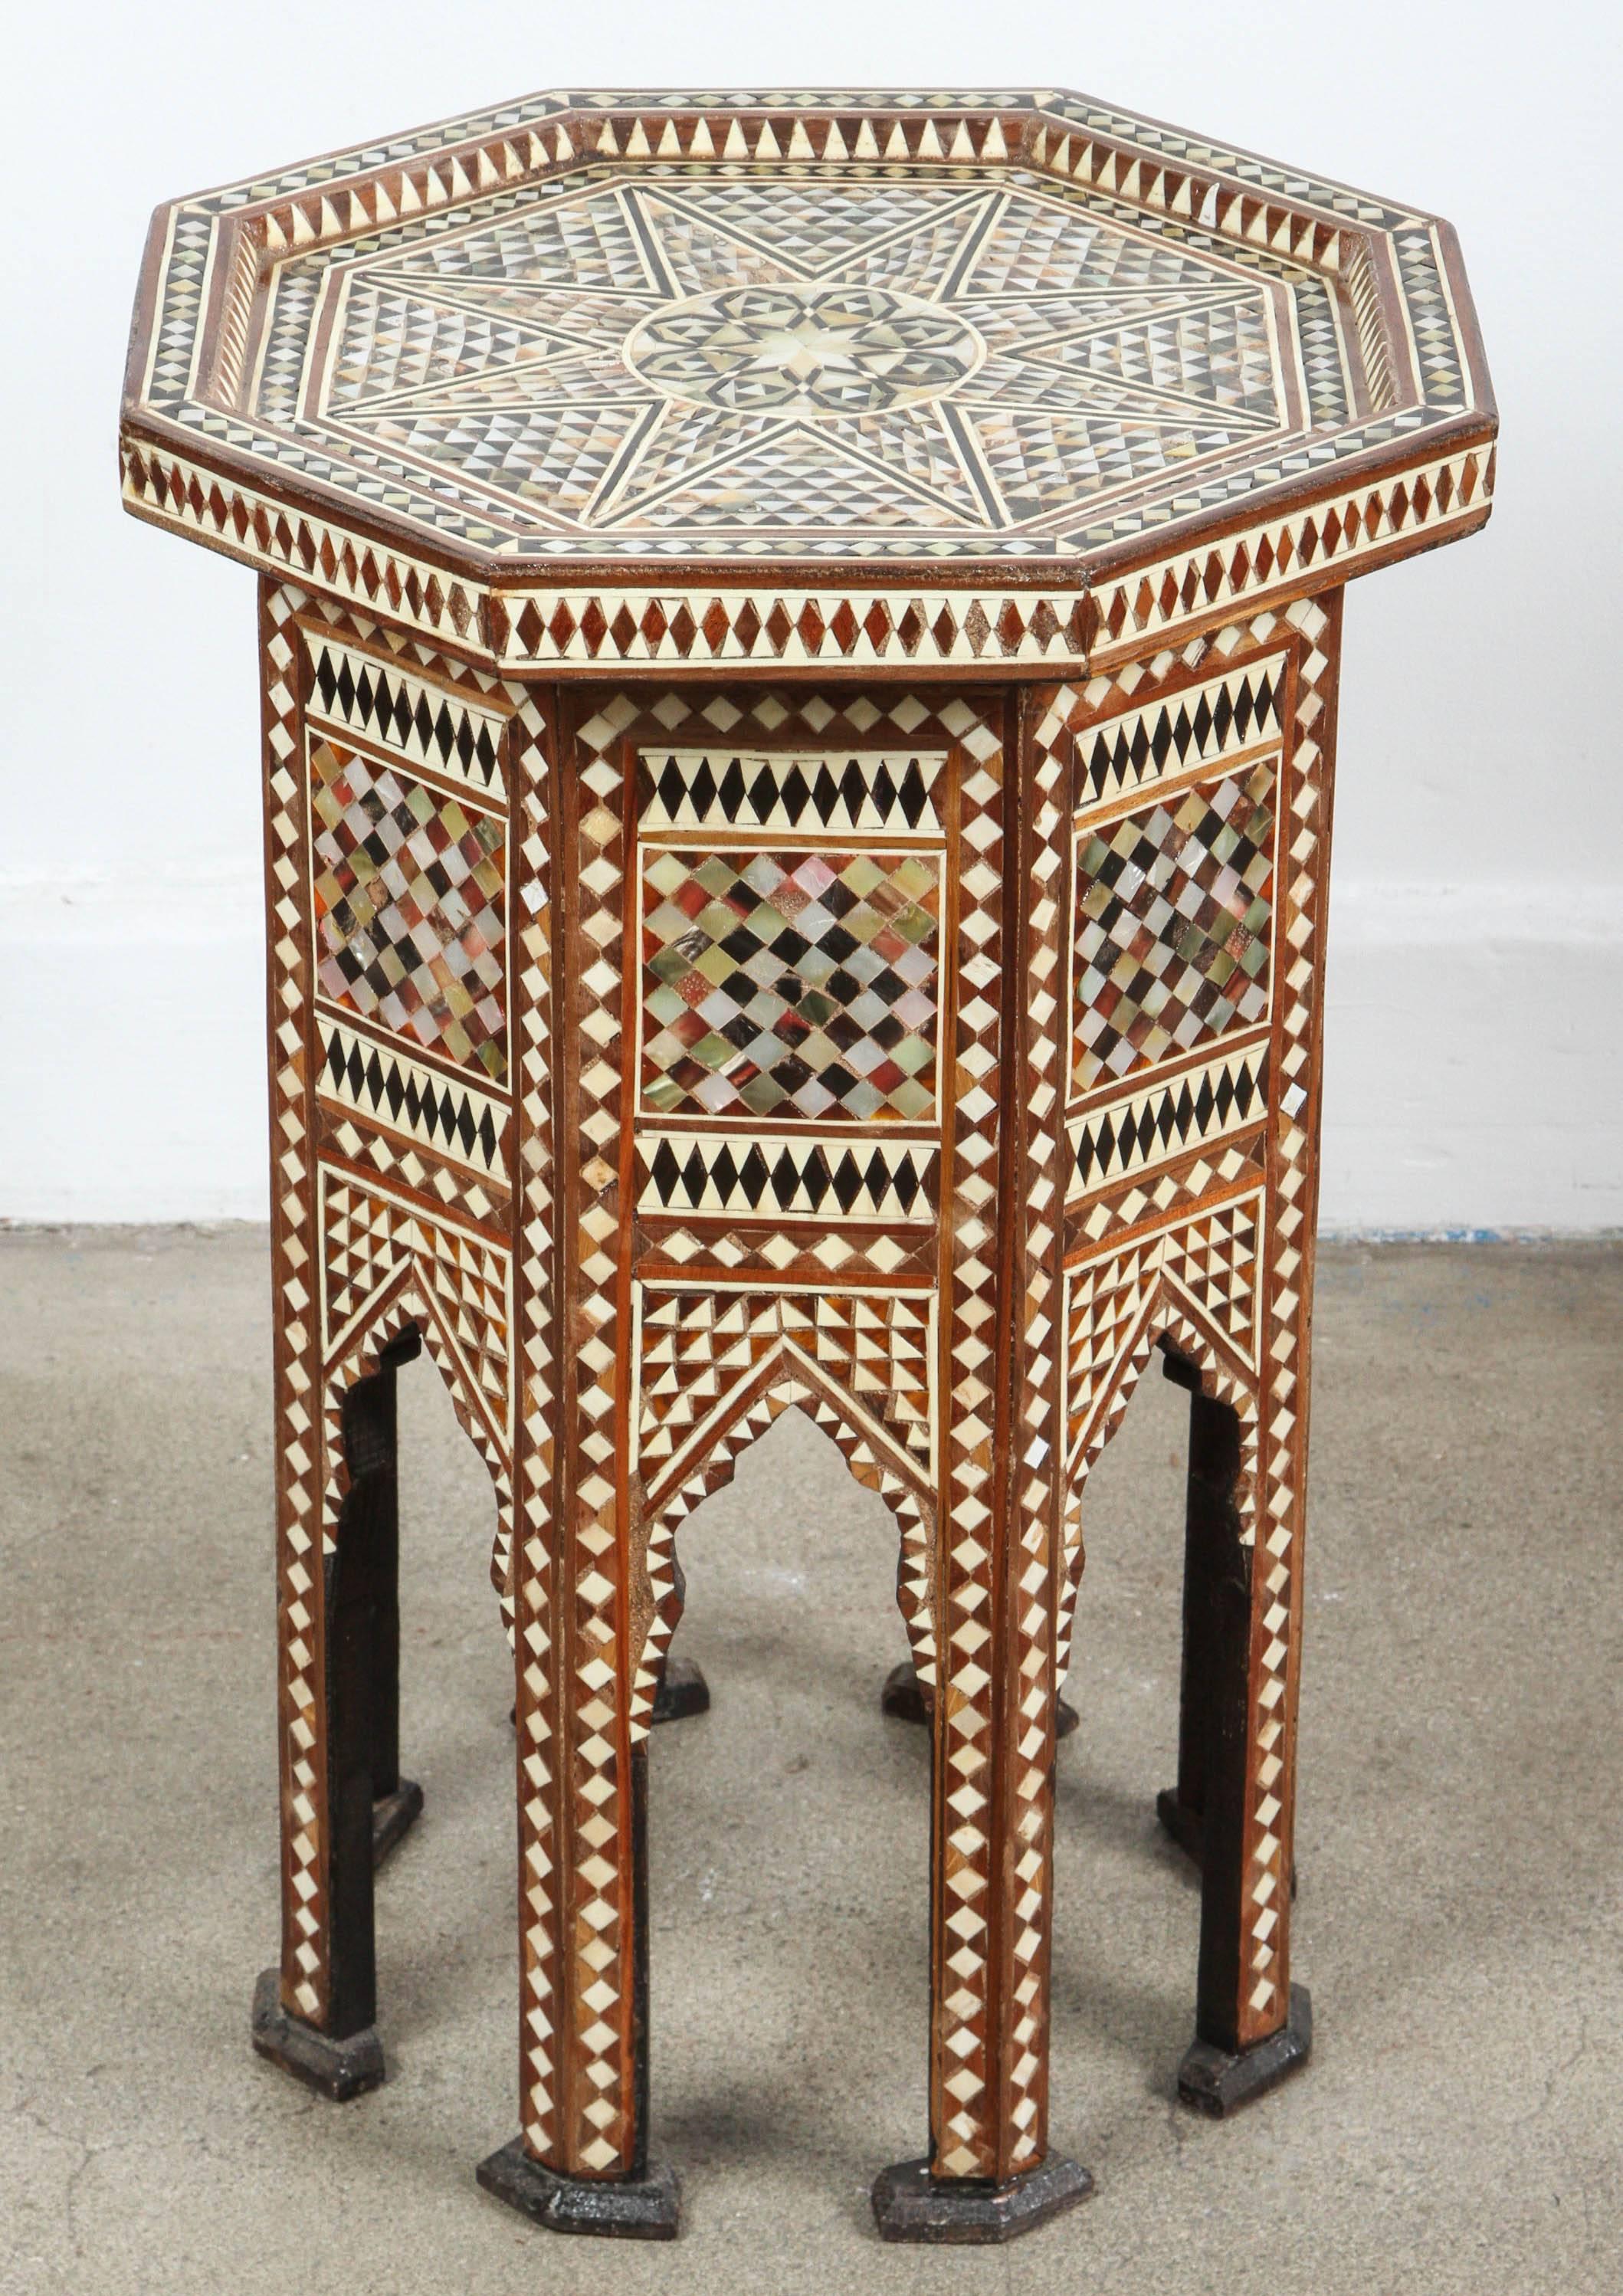 Moroccan Moorish Octagonal Tables Inlay with Mother of Pearl